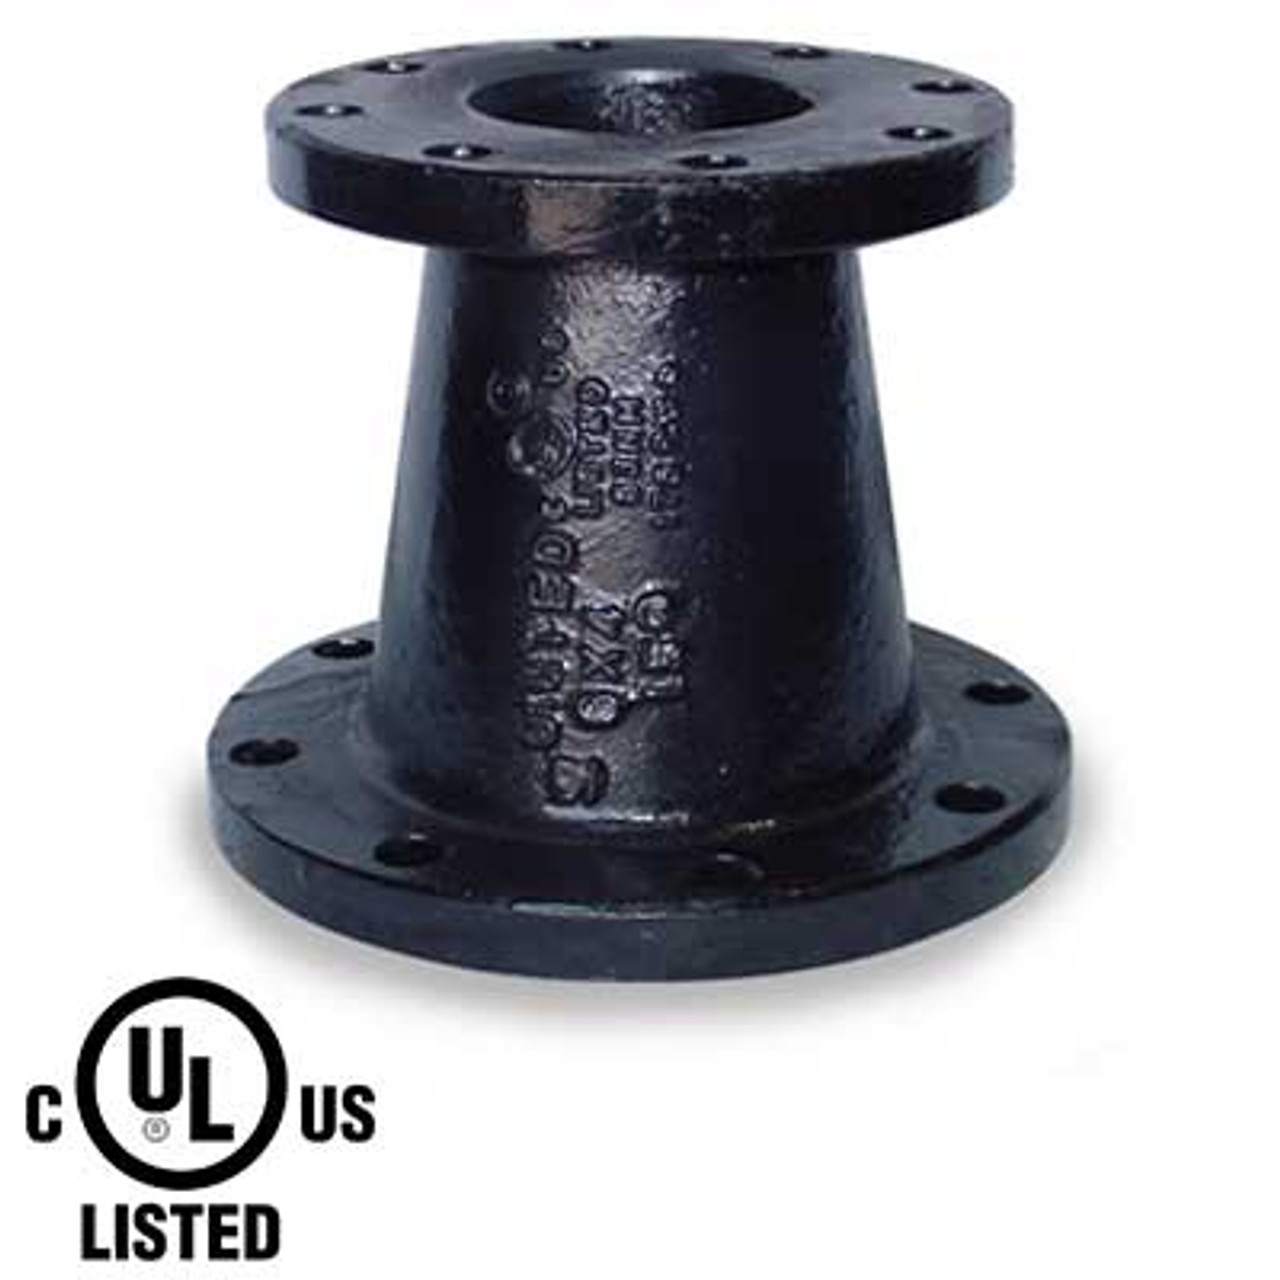 Flanged Black Pipe Fittings 125# Cast Iron 12" x 8" Concentric Reducers 12 Inch To 8 Inch Duct Reducer